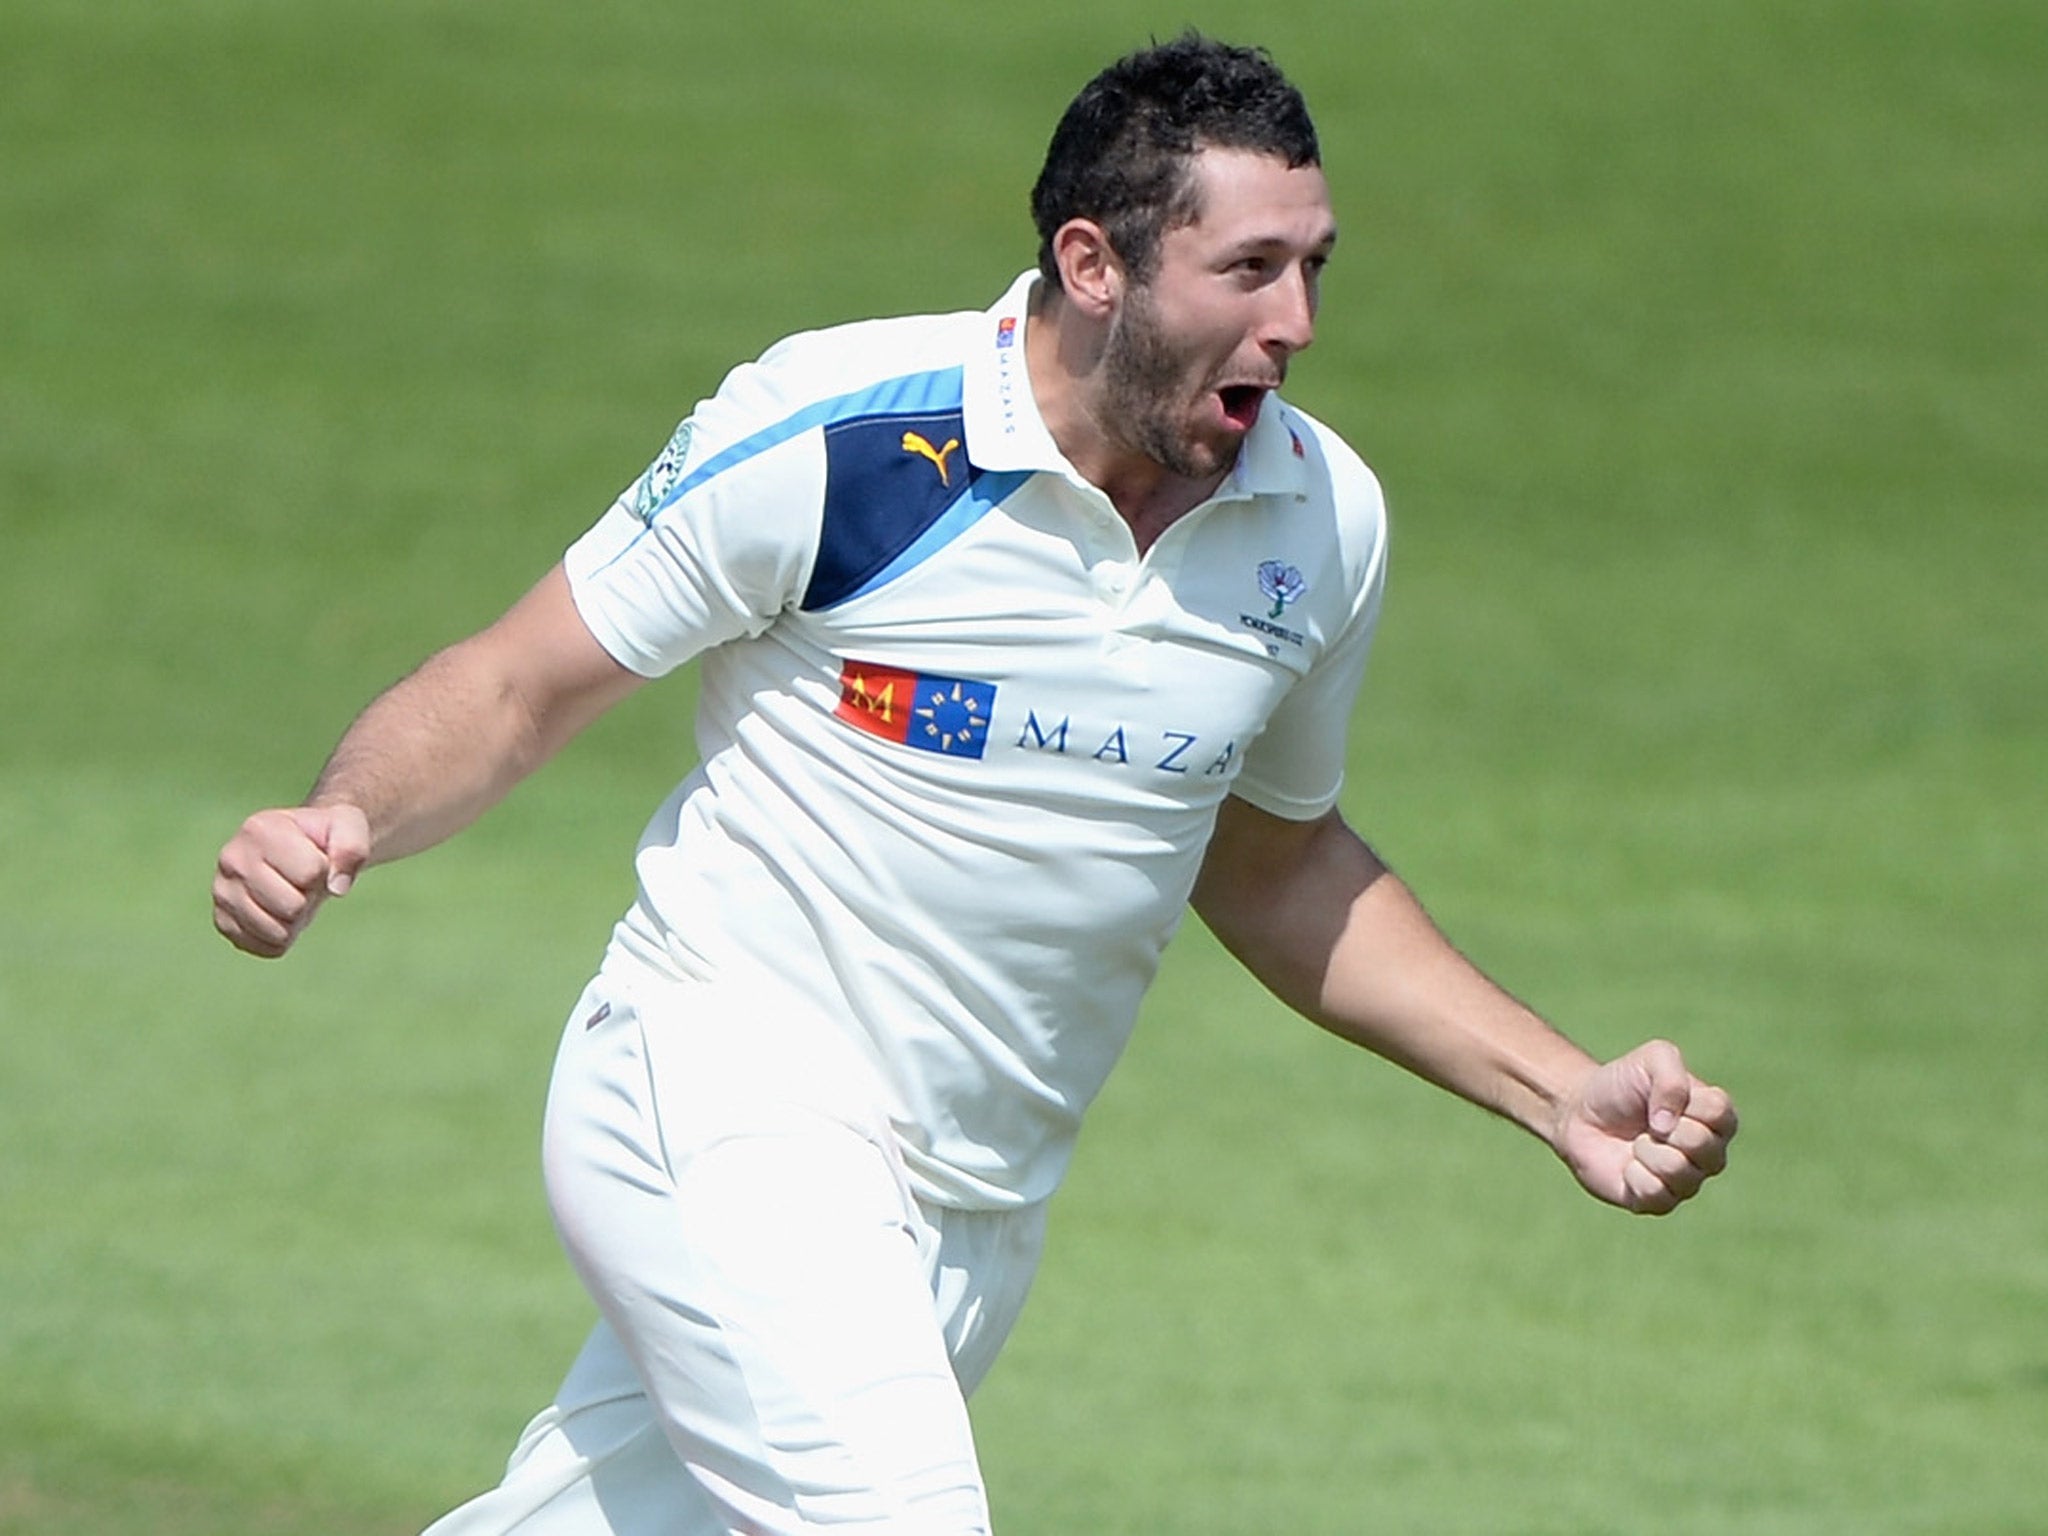 Tim Bresnan is back to his best after a long-standing elbow injury